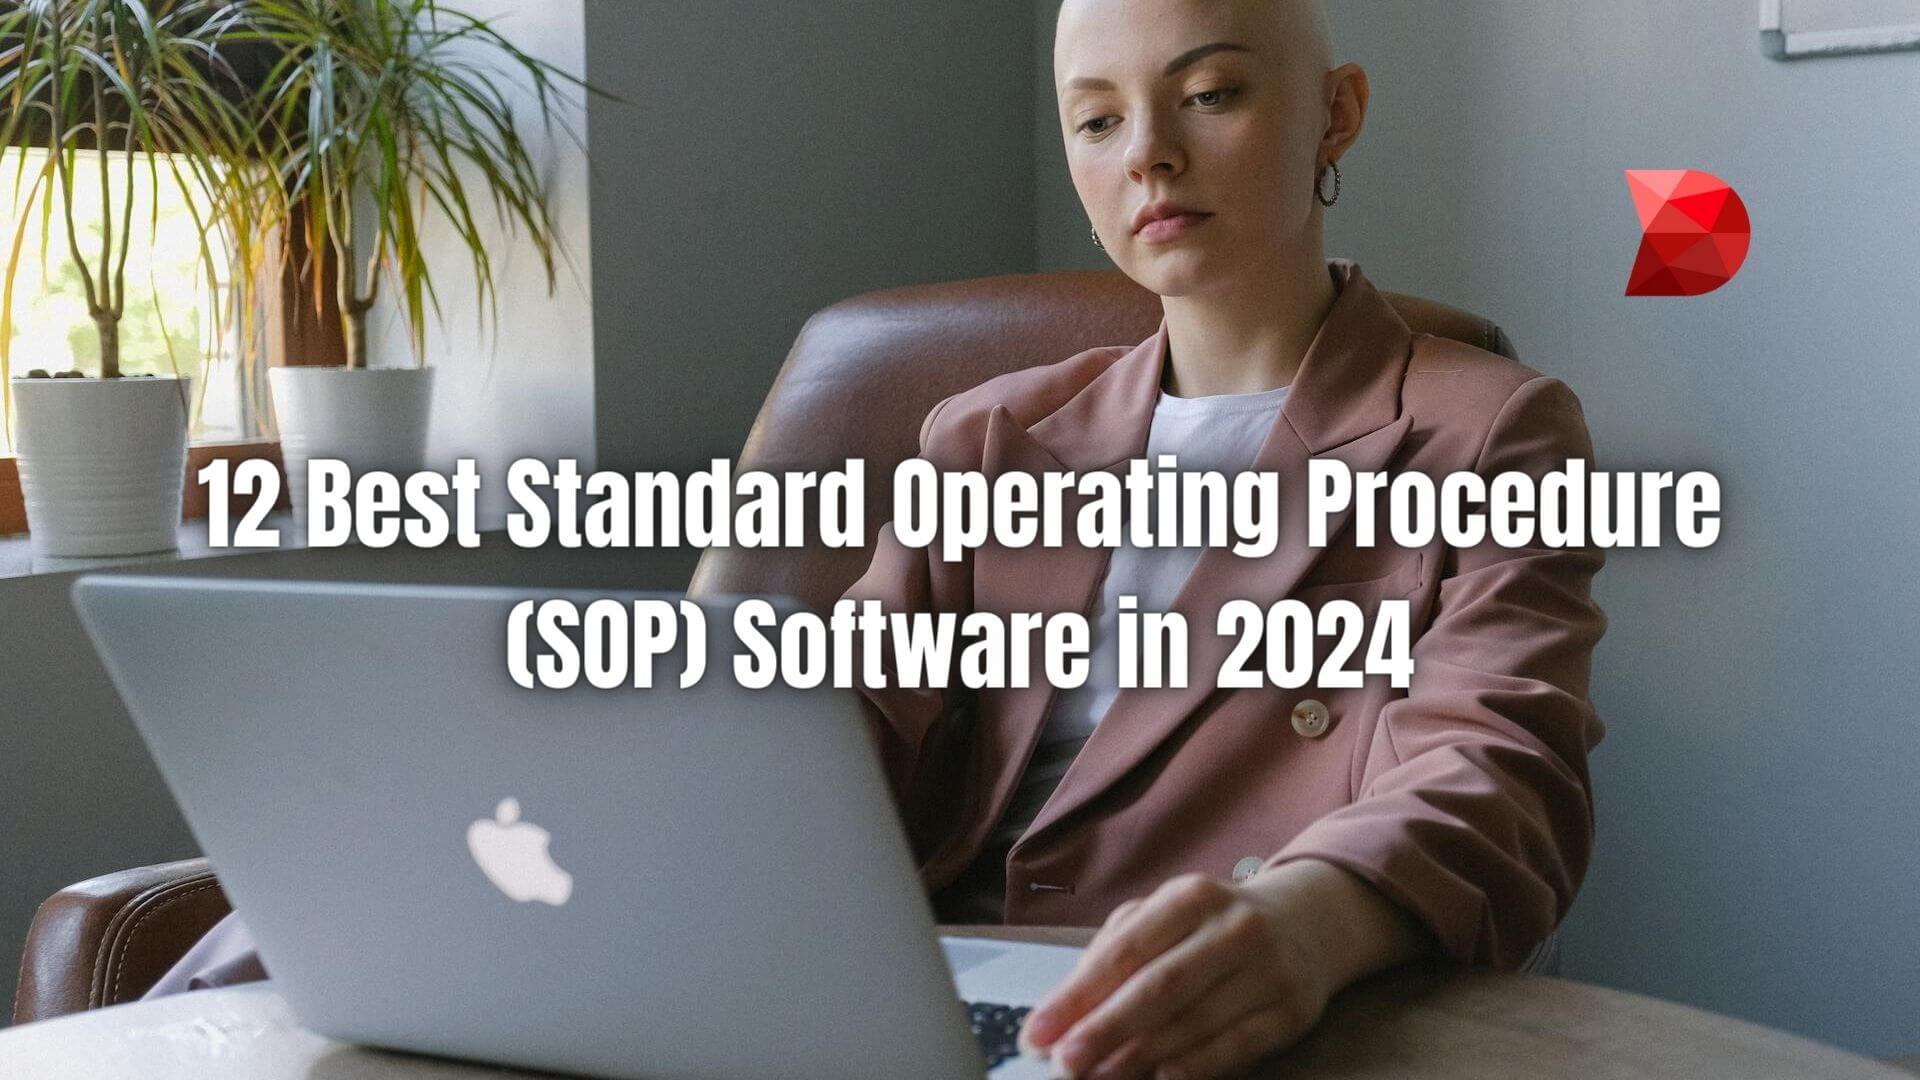 Boost productivity with the 12 best SOP software in 2024. Learn about the latest tools and streamline your operations effectively.